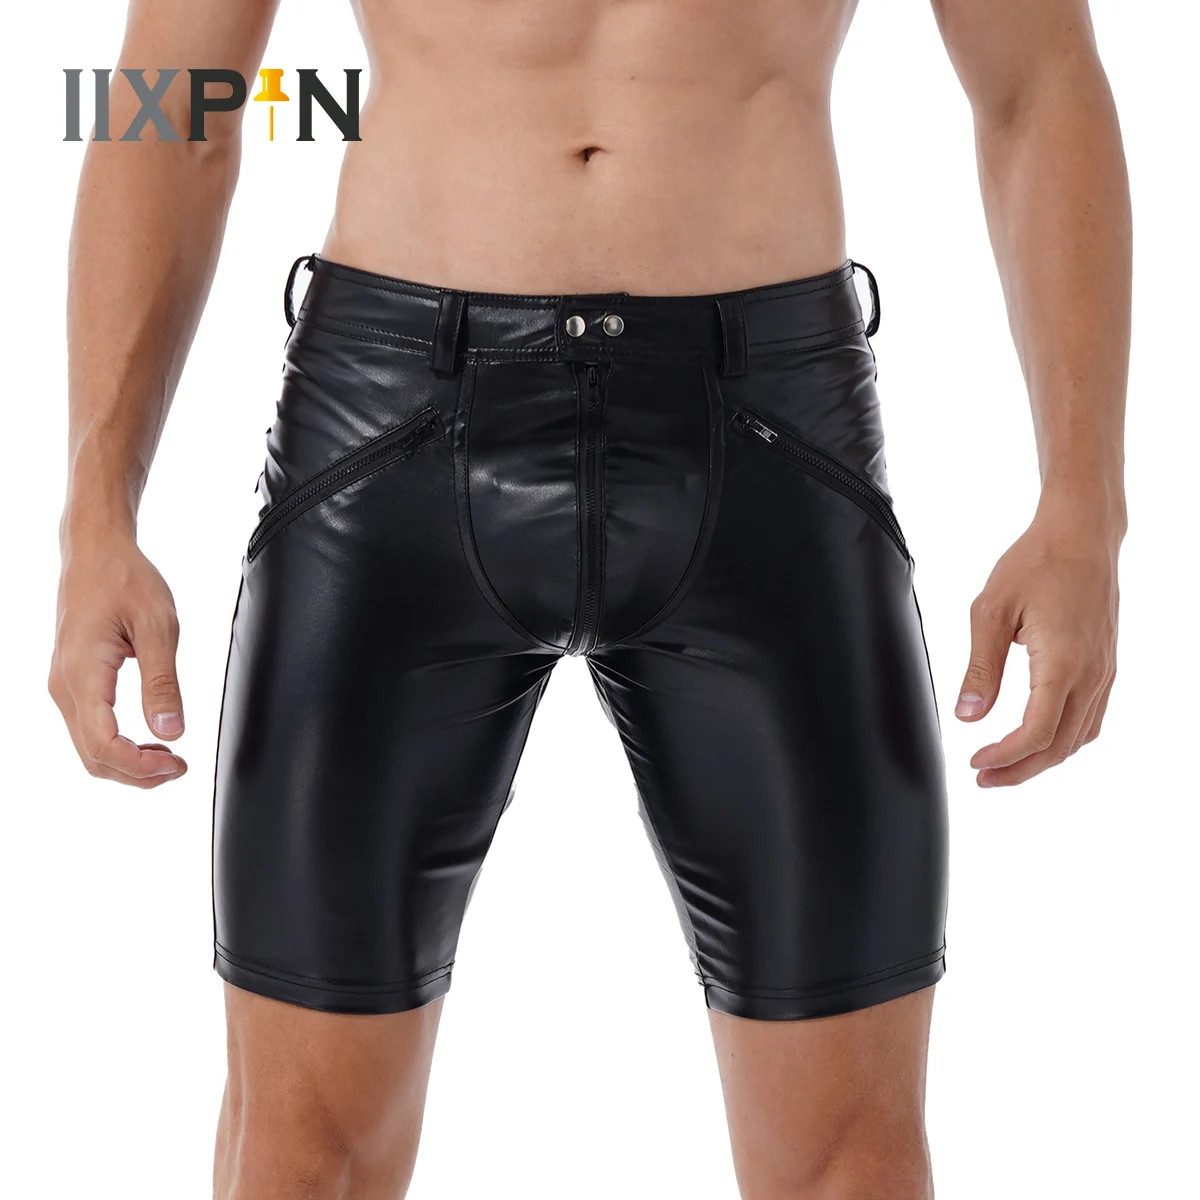 Black Men Latex Wetlook Pants Sexy Soft Leather Middle Pants Full Zipper Workout Gym Fitness Shorts Fashion Punk Party Clubwear